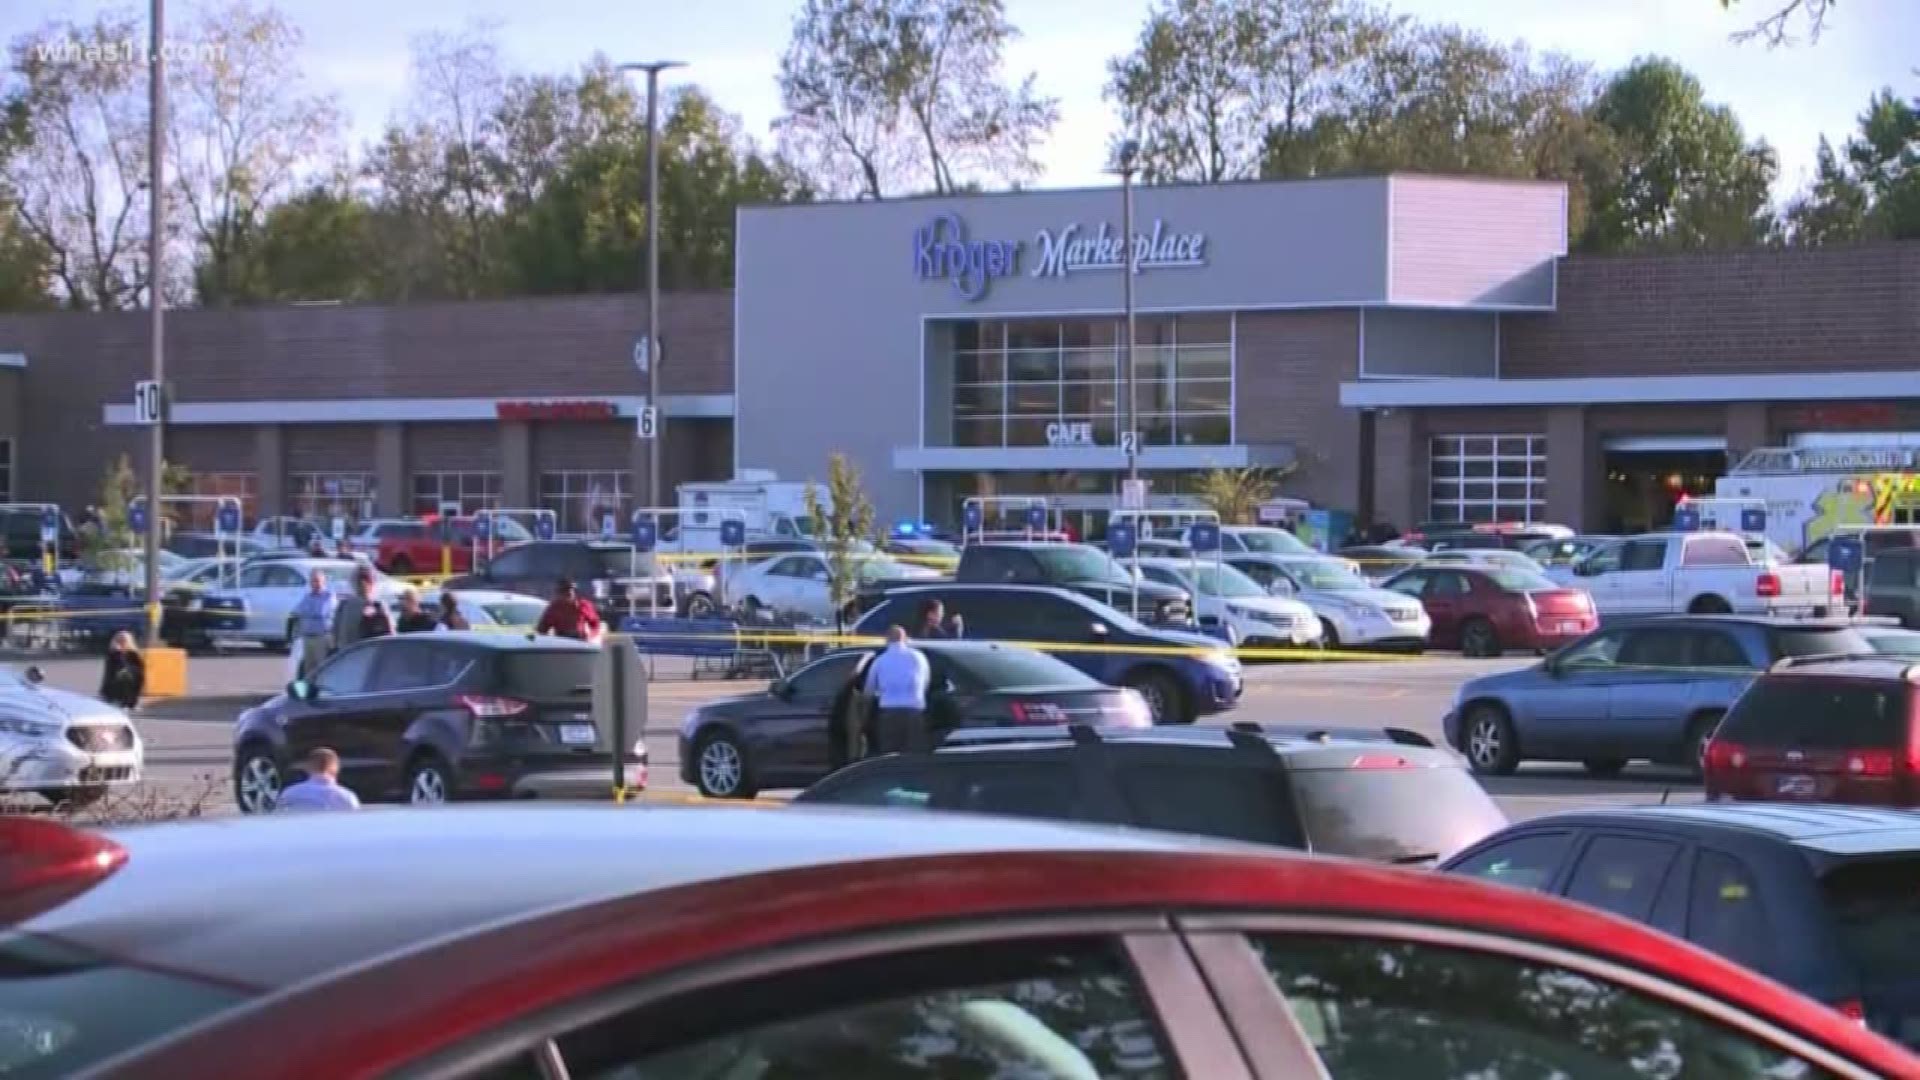 Federal investigators are saying publicly for the first time, they will look at the kroger shooting as a possible hate crime.